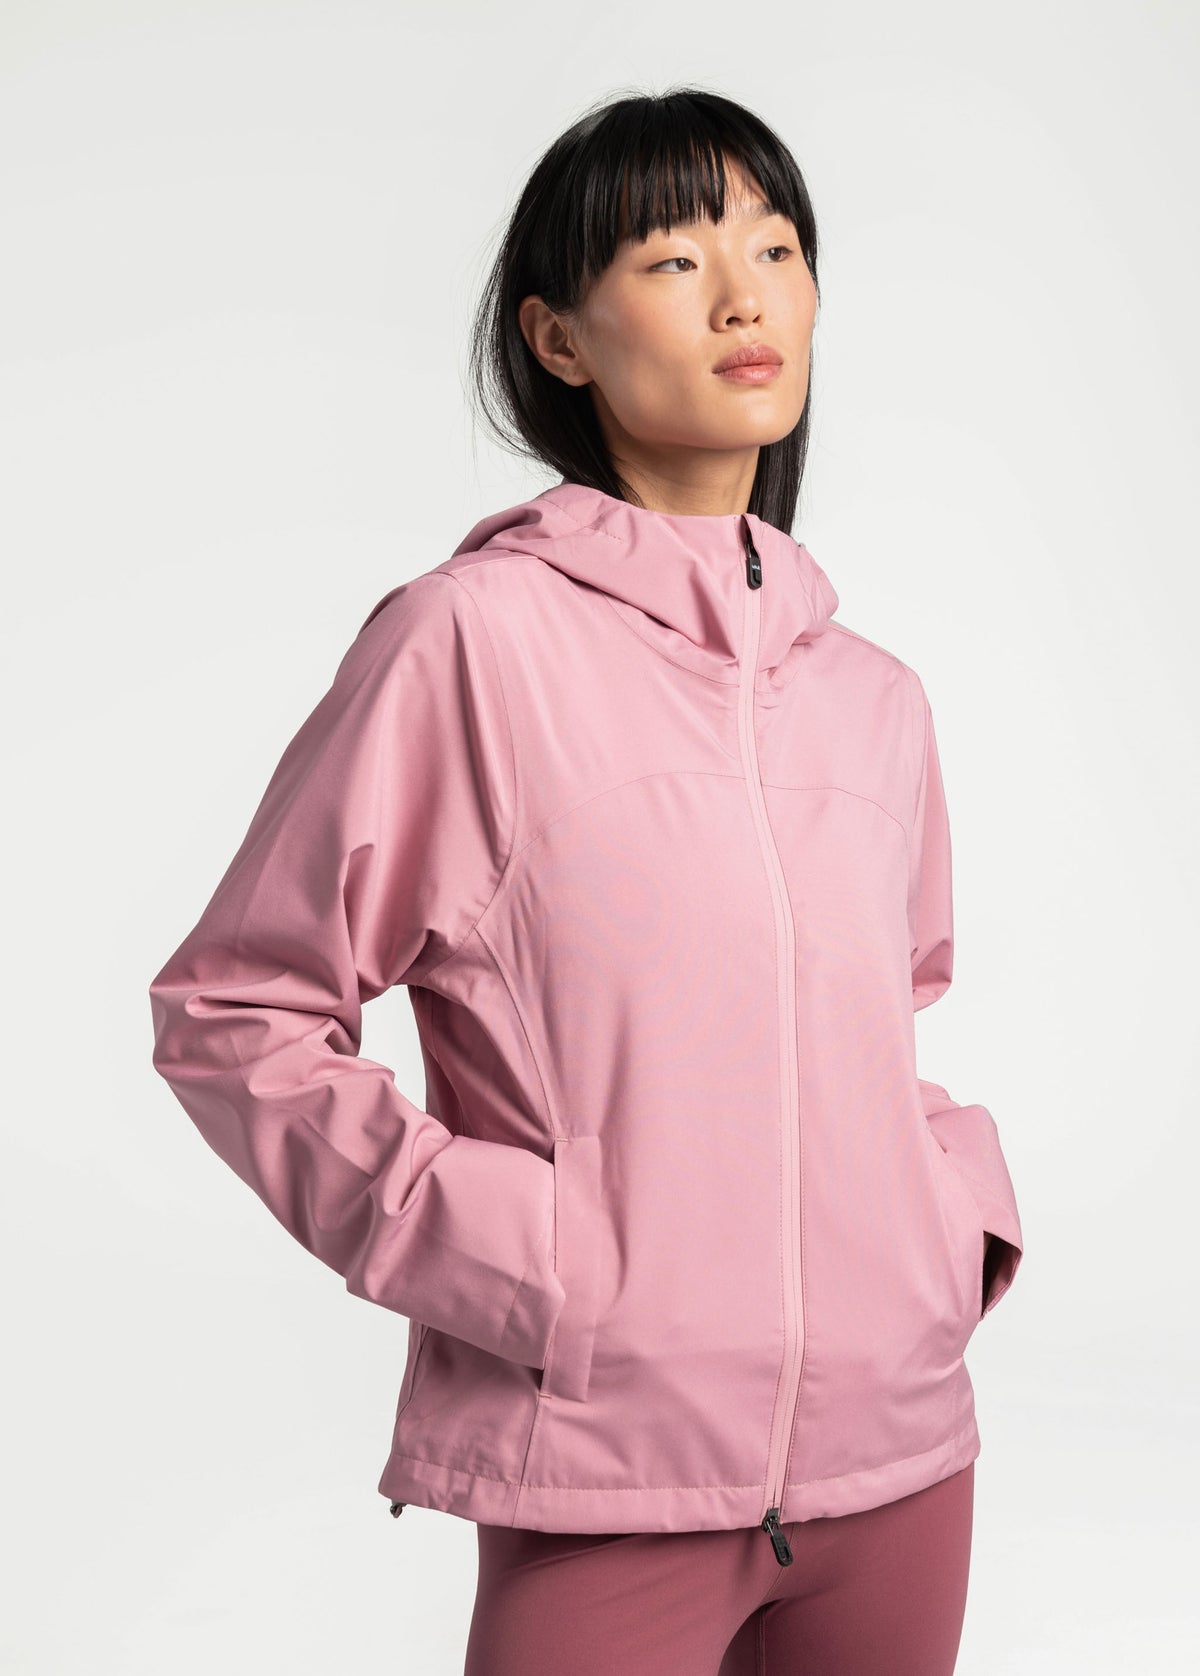 Uniqlo Ultra Light Down Compact Jacket Review 2018  The Strategist